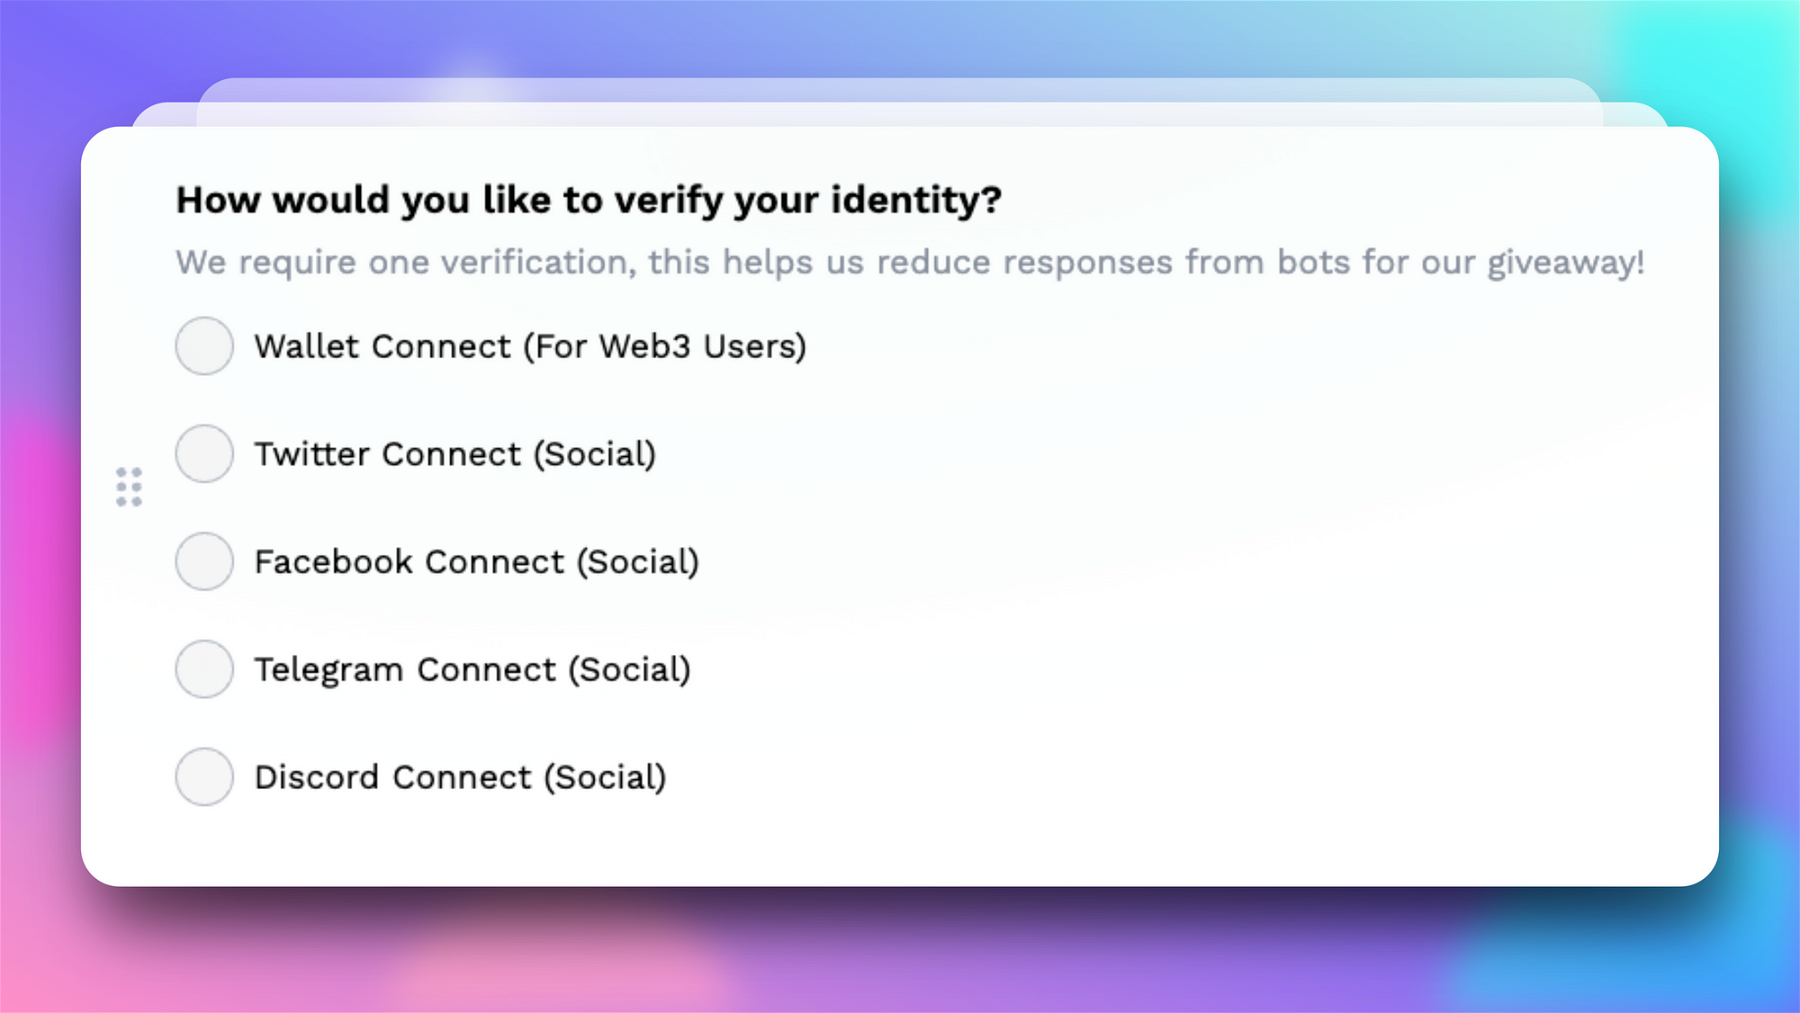 Using conditional logic on DeForm so that a responder can choose how they want to verify their identity is great for communities that may be spread across different social media sites.